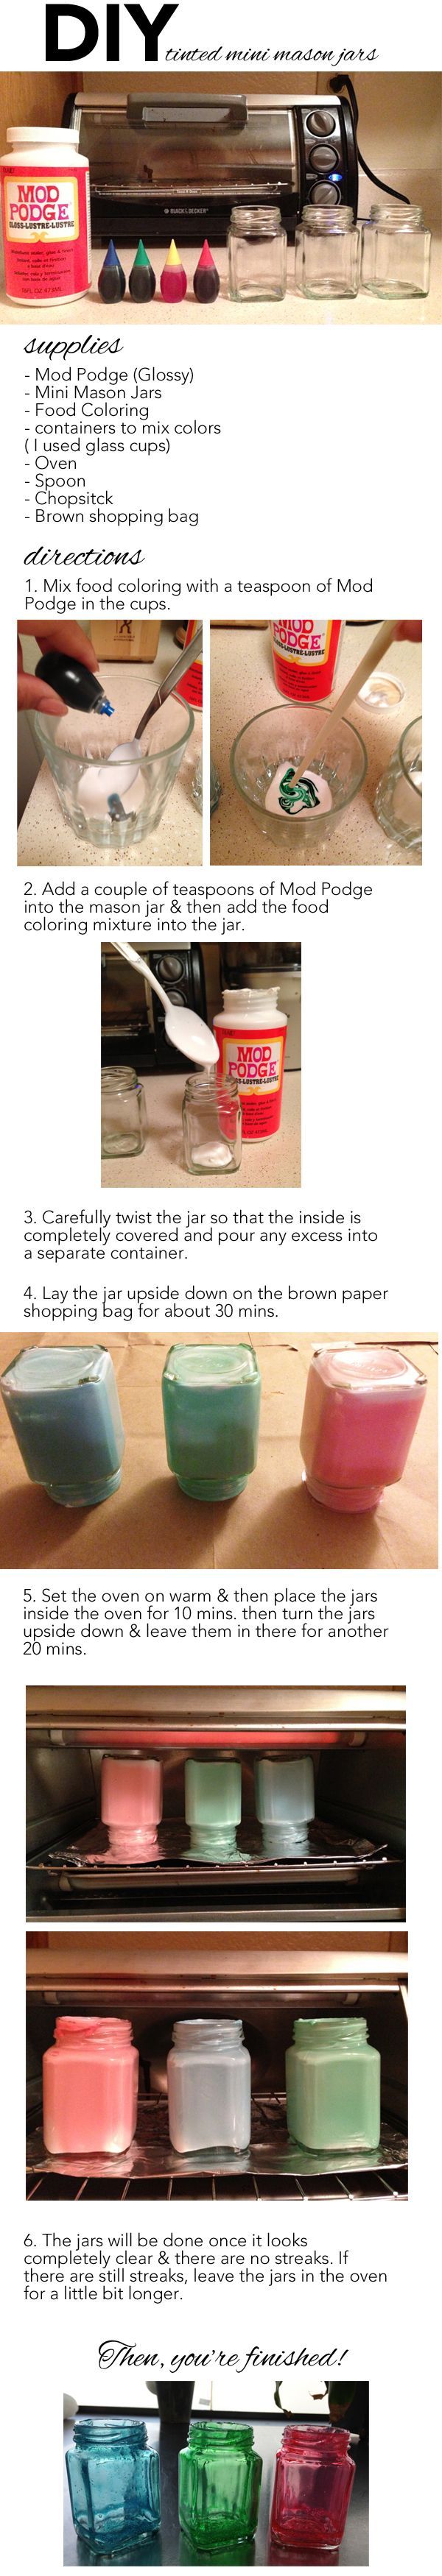 Cute idea for Mason jar vases!!! They come out with the color so you can see thr